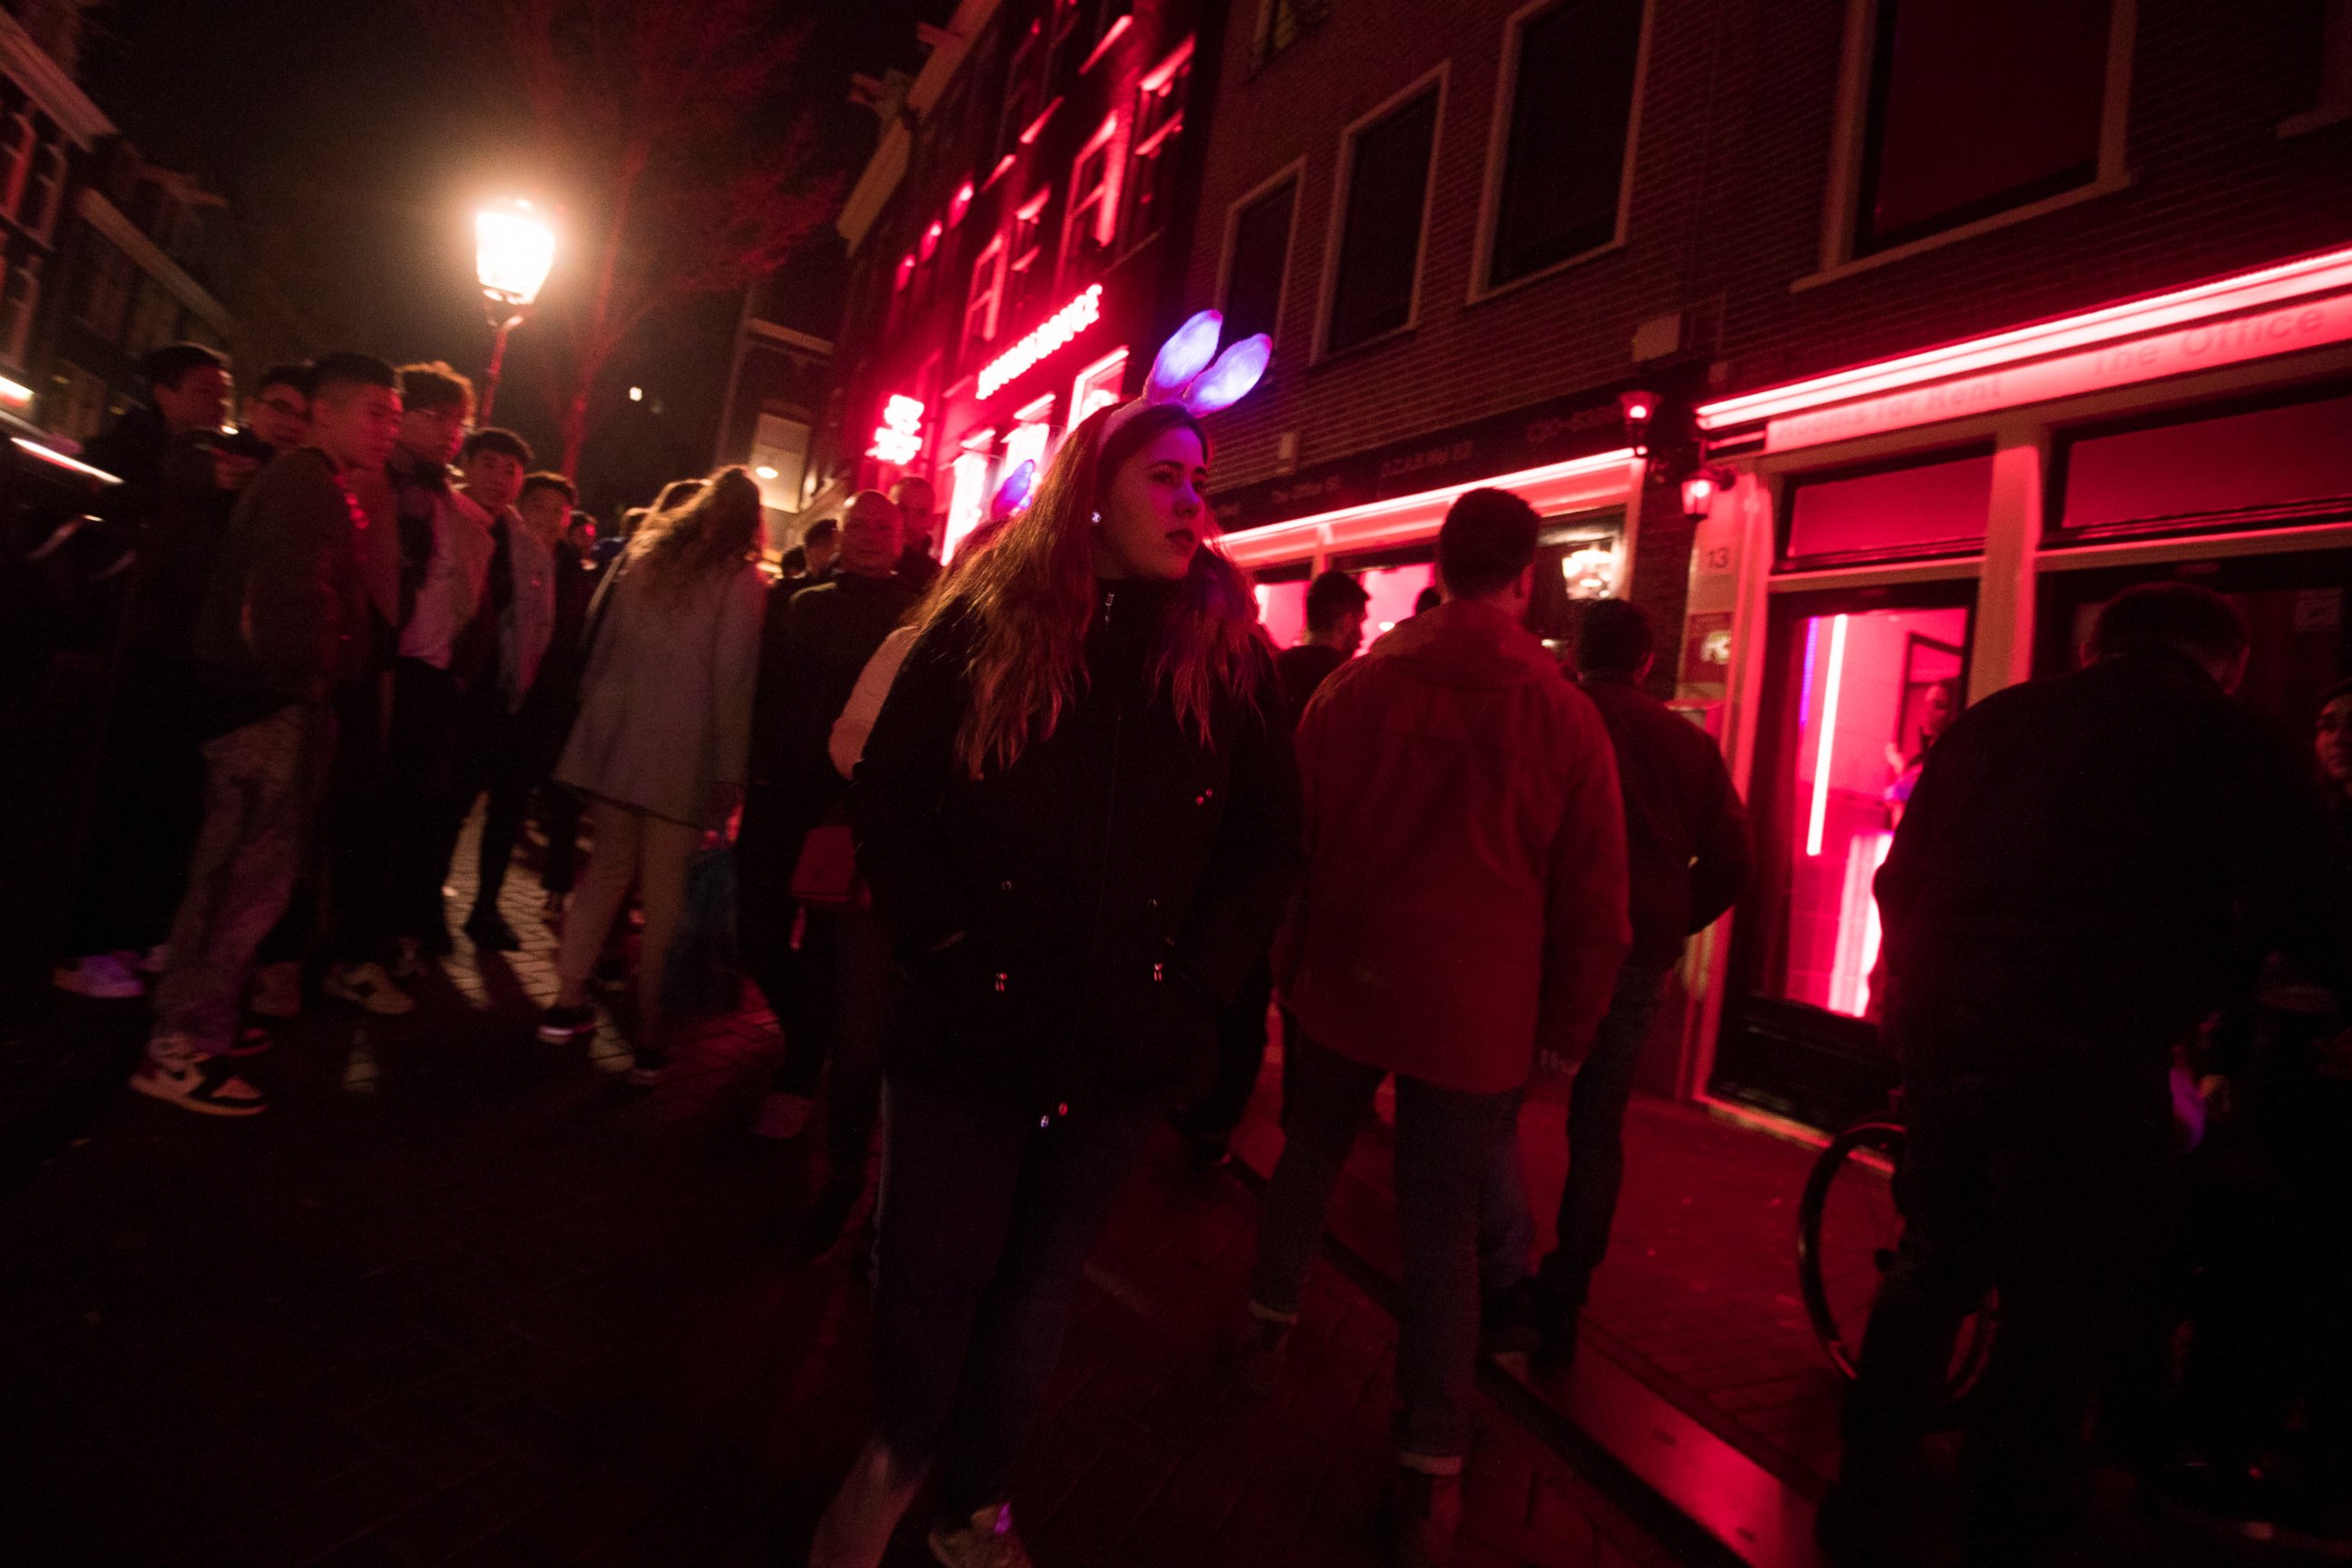 PHOTO: Tourists crowd the narrow canal-side streets in Amsterdam's red light district, Netherlands, Friday evening, March 29, 2019.